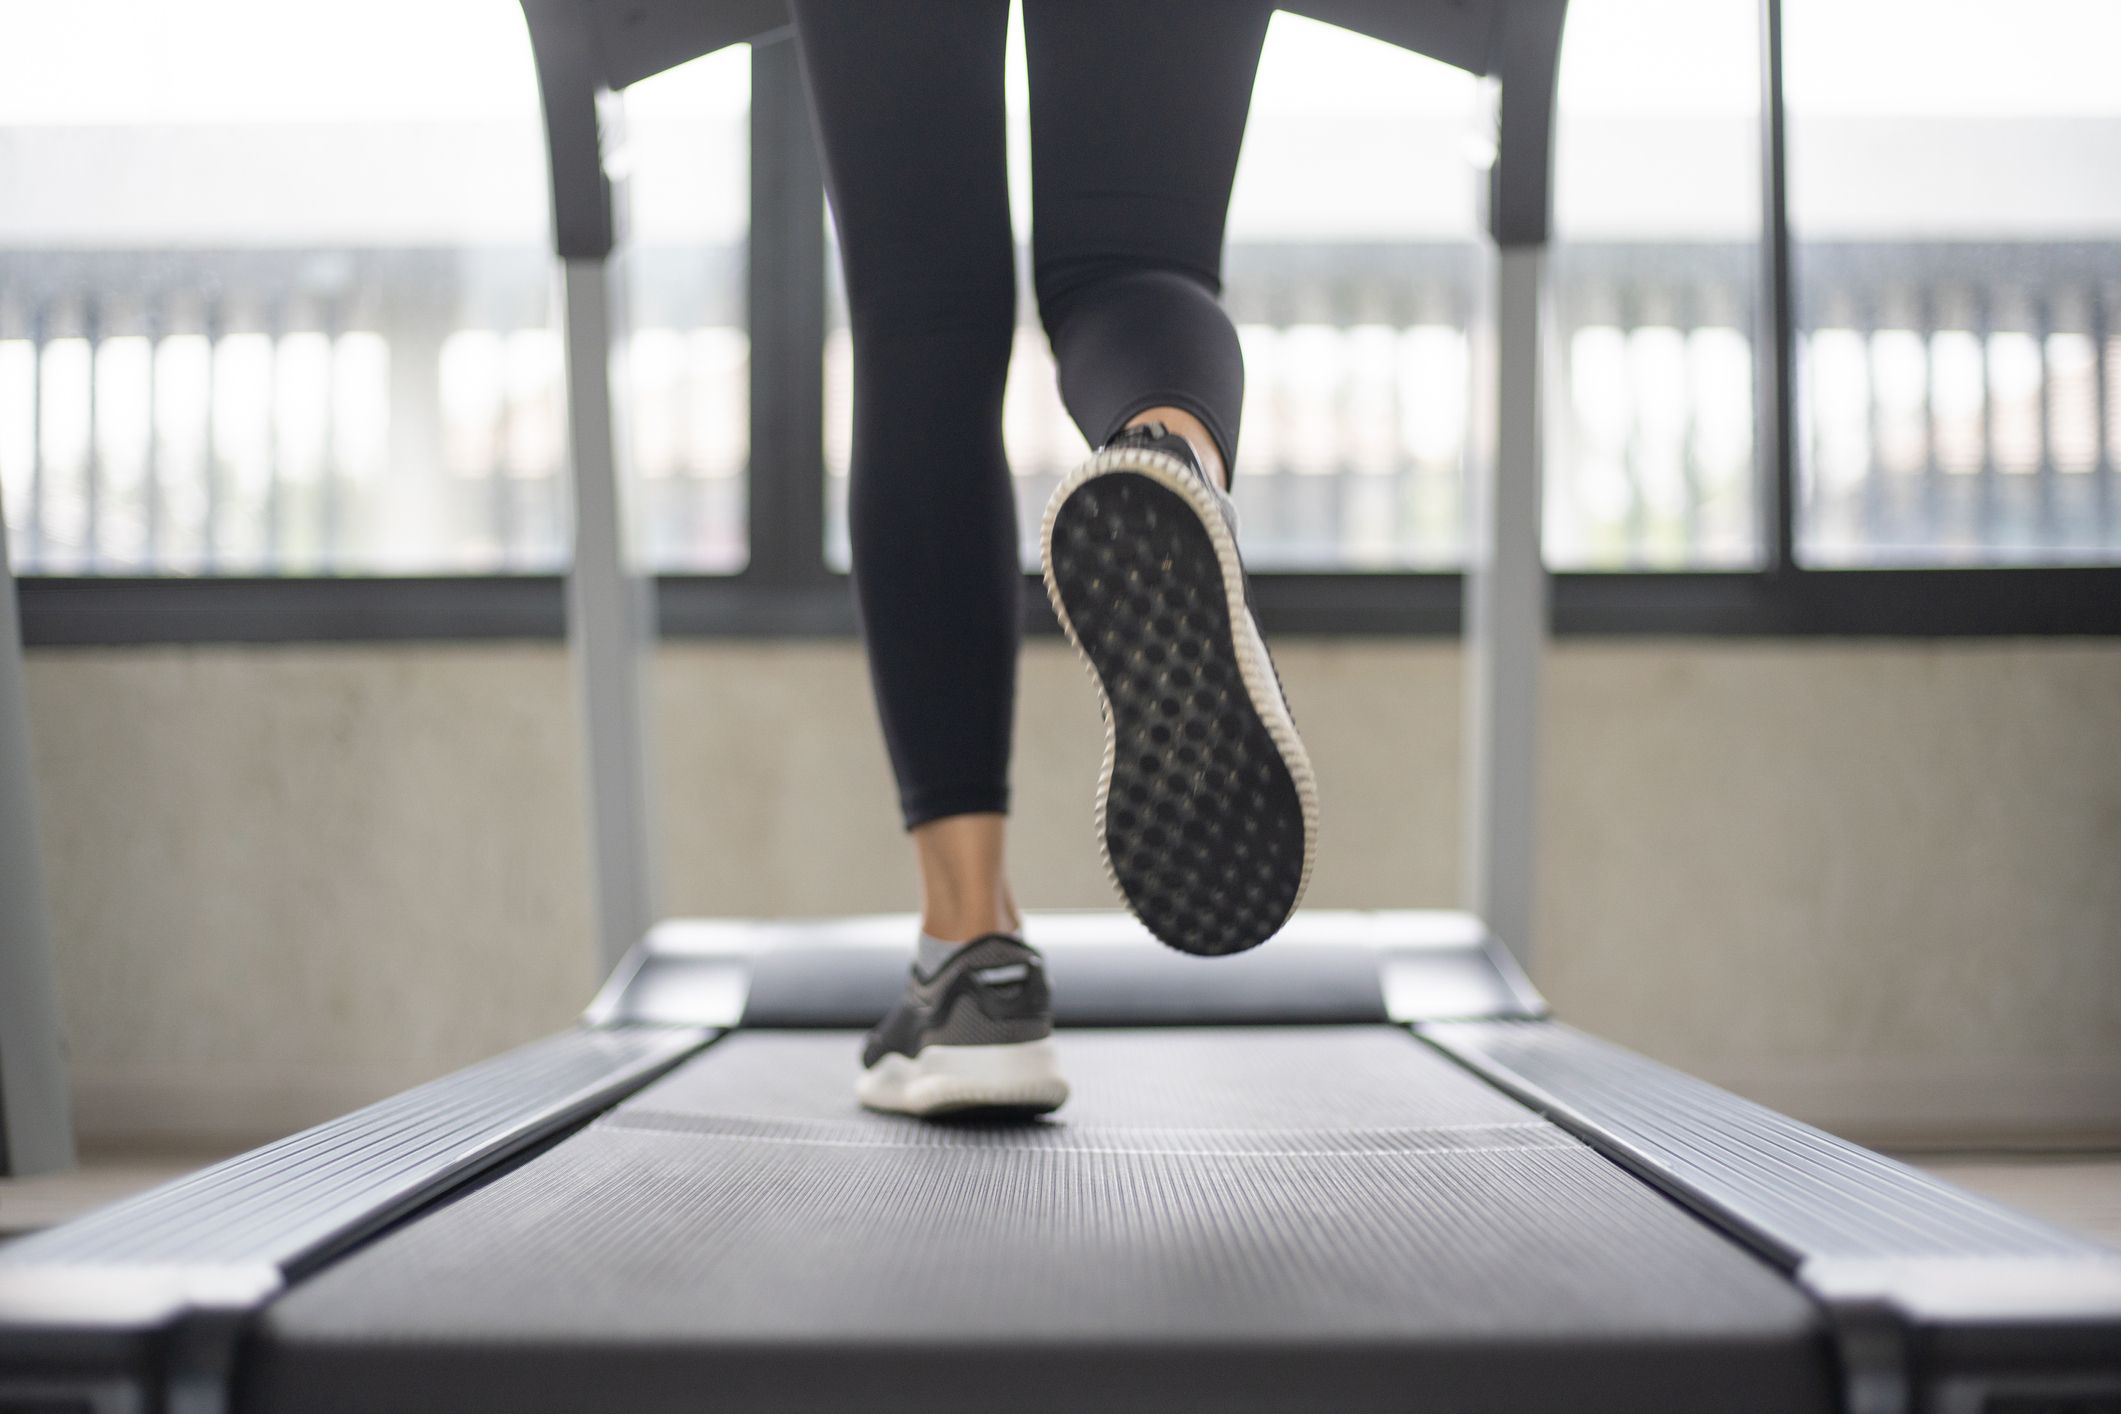 Is It Better to Do Cardio Before or After Weights?